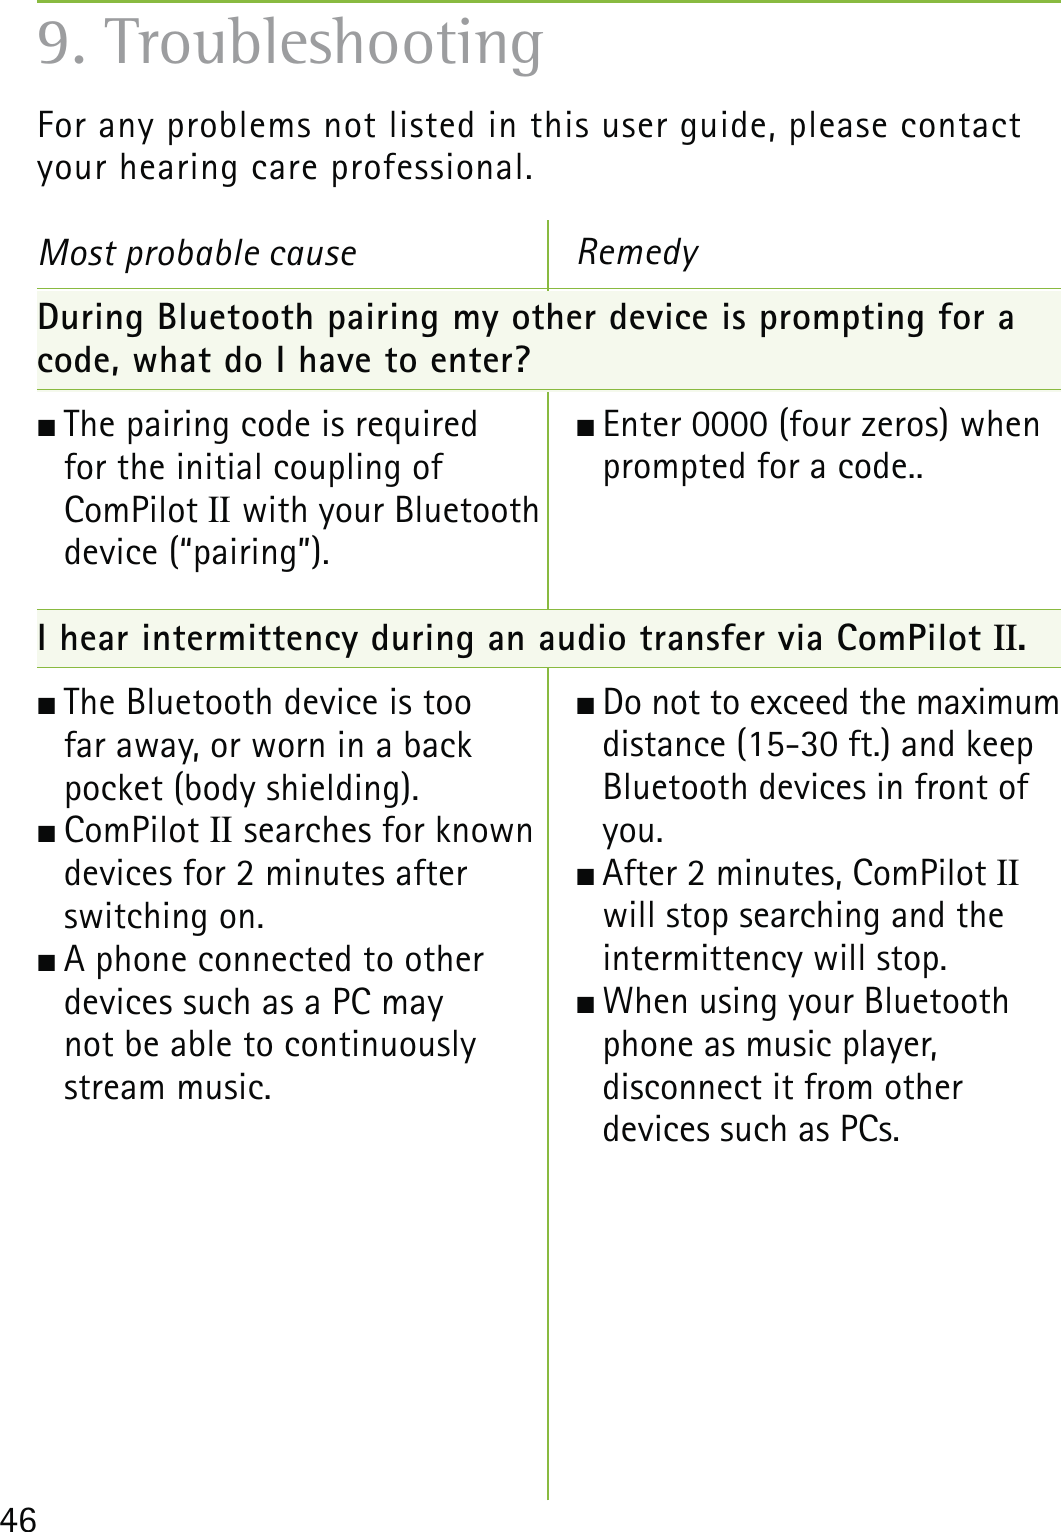 46For any problems not listed in this user guide, please contactyour hearing care professional.Most probable cause During Bluetooth pairing my other device is prompting for a code, what do I have to enter? The pairing code is required  for the initial coupling of  ComPilot II with your Bluetooth  device (“pairing”).  I hear intermittency during an audio transfer via ComPilot II. The Bluetooth device is too  far away, or worn in a back  pocket (body shielding).  ComPilot II searches for known  devices for 2 minutes after  switching on.  A phone connected to other  devices such as a PC may  not be able to continuously  stream music.Remedy Enter 0000 (four zeros) when prompted for a code.. Do not to exceed the maximum distance (15-30 ft.) and keep Bluetooth devices in front of you. After 2 minutes, ComPilot II  will stop searching and the  intermittency will stop.  When using your Bluetooth phone as music player,  disconnect it from other  devices such as PCs. 9. Troubleshooting